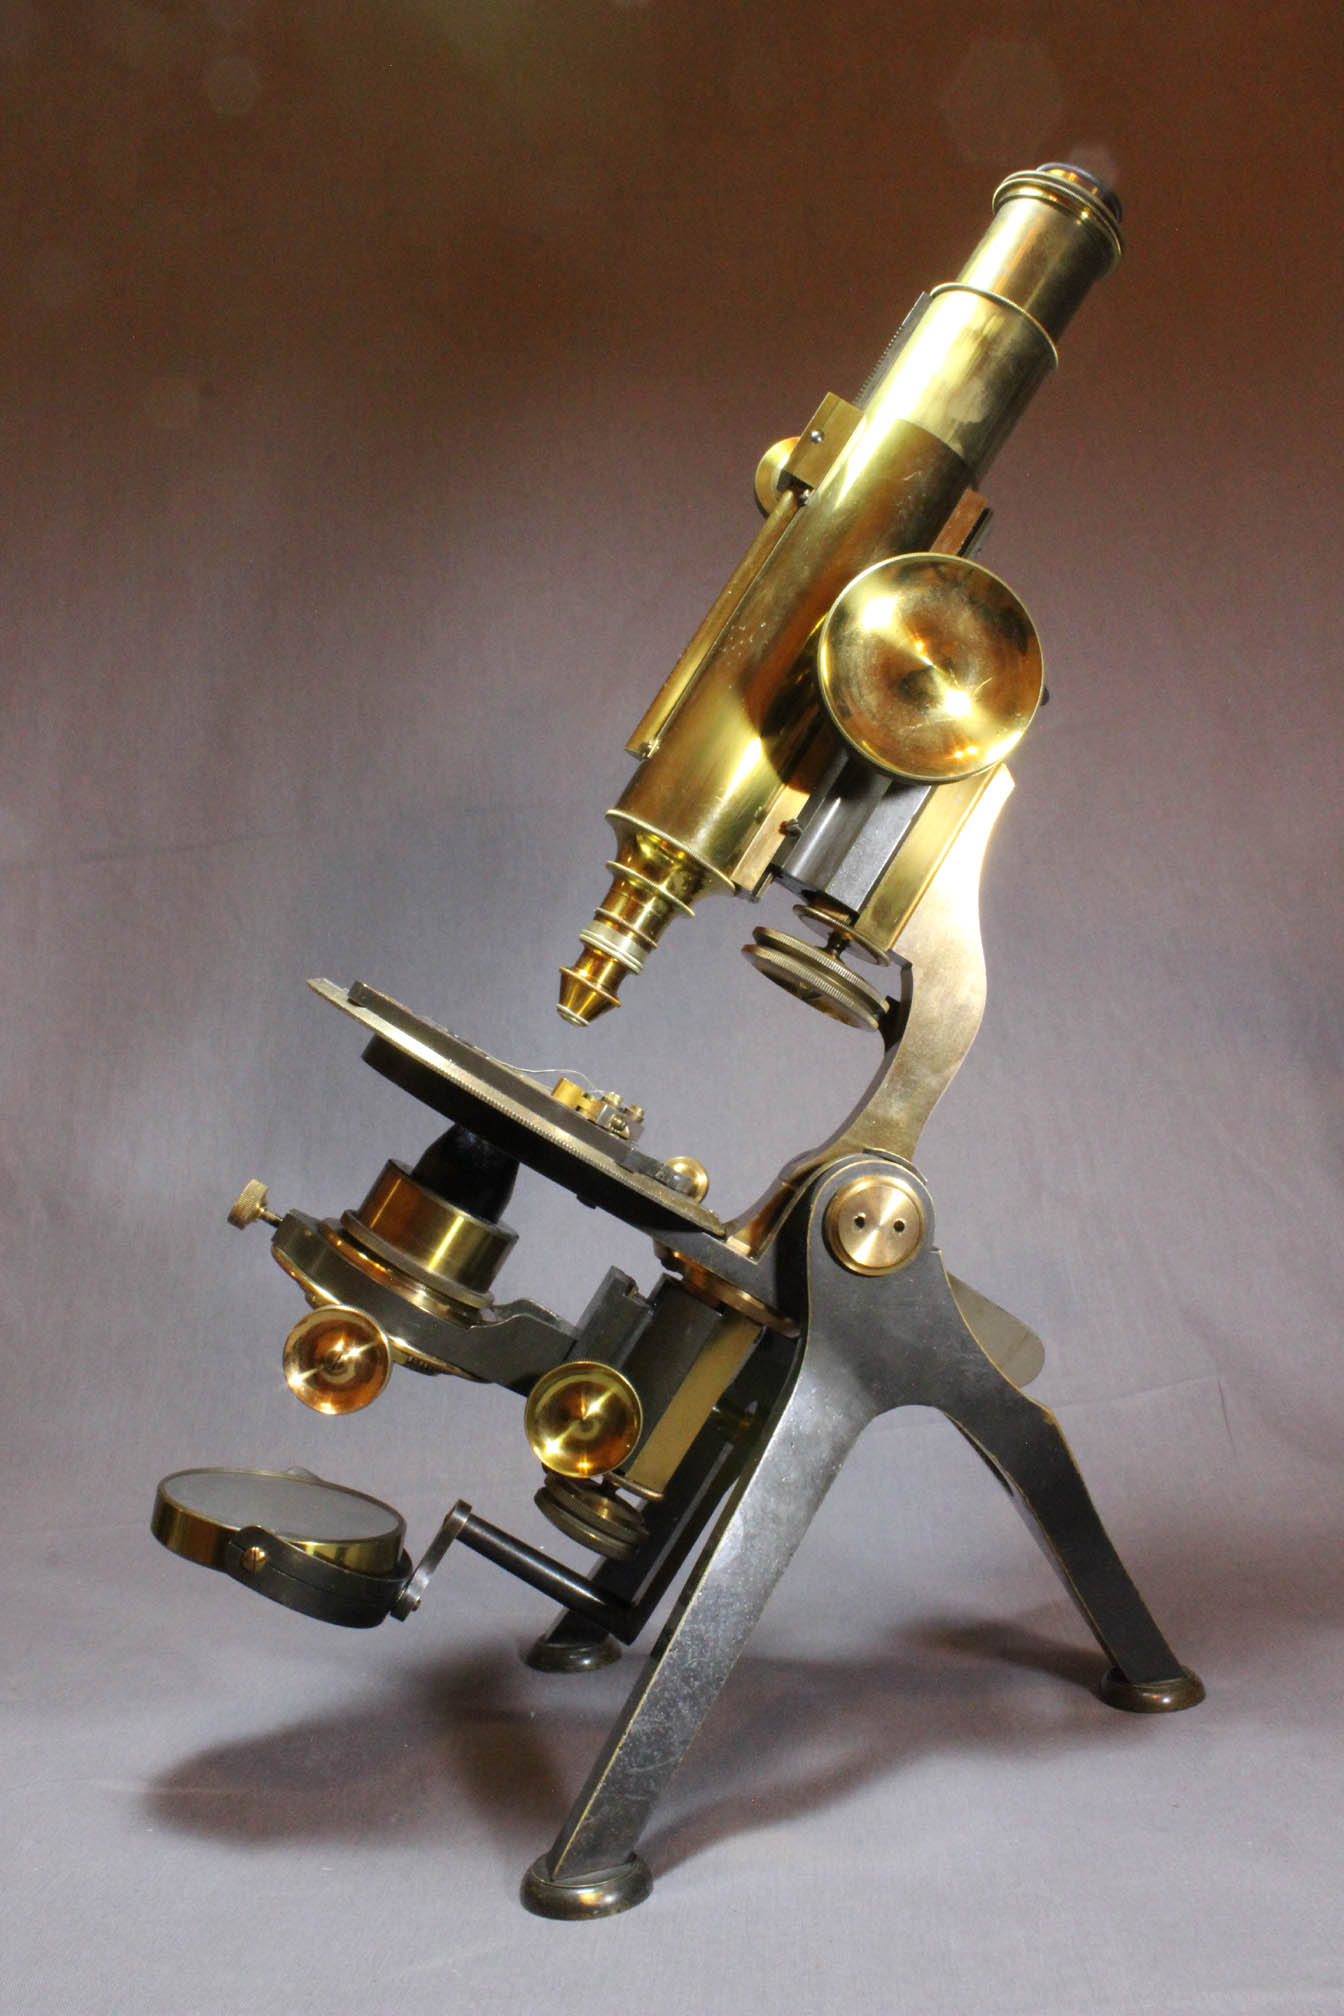 Nelson-Curties Microscope left side